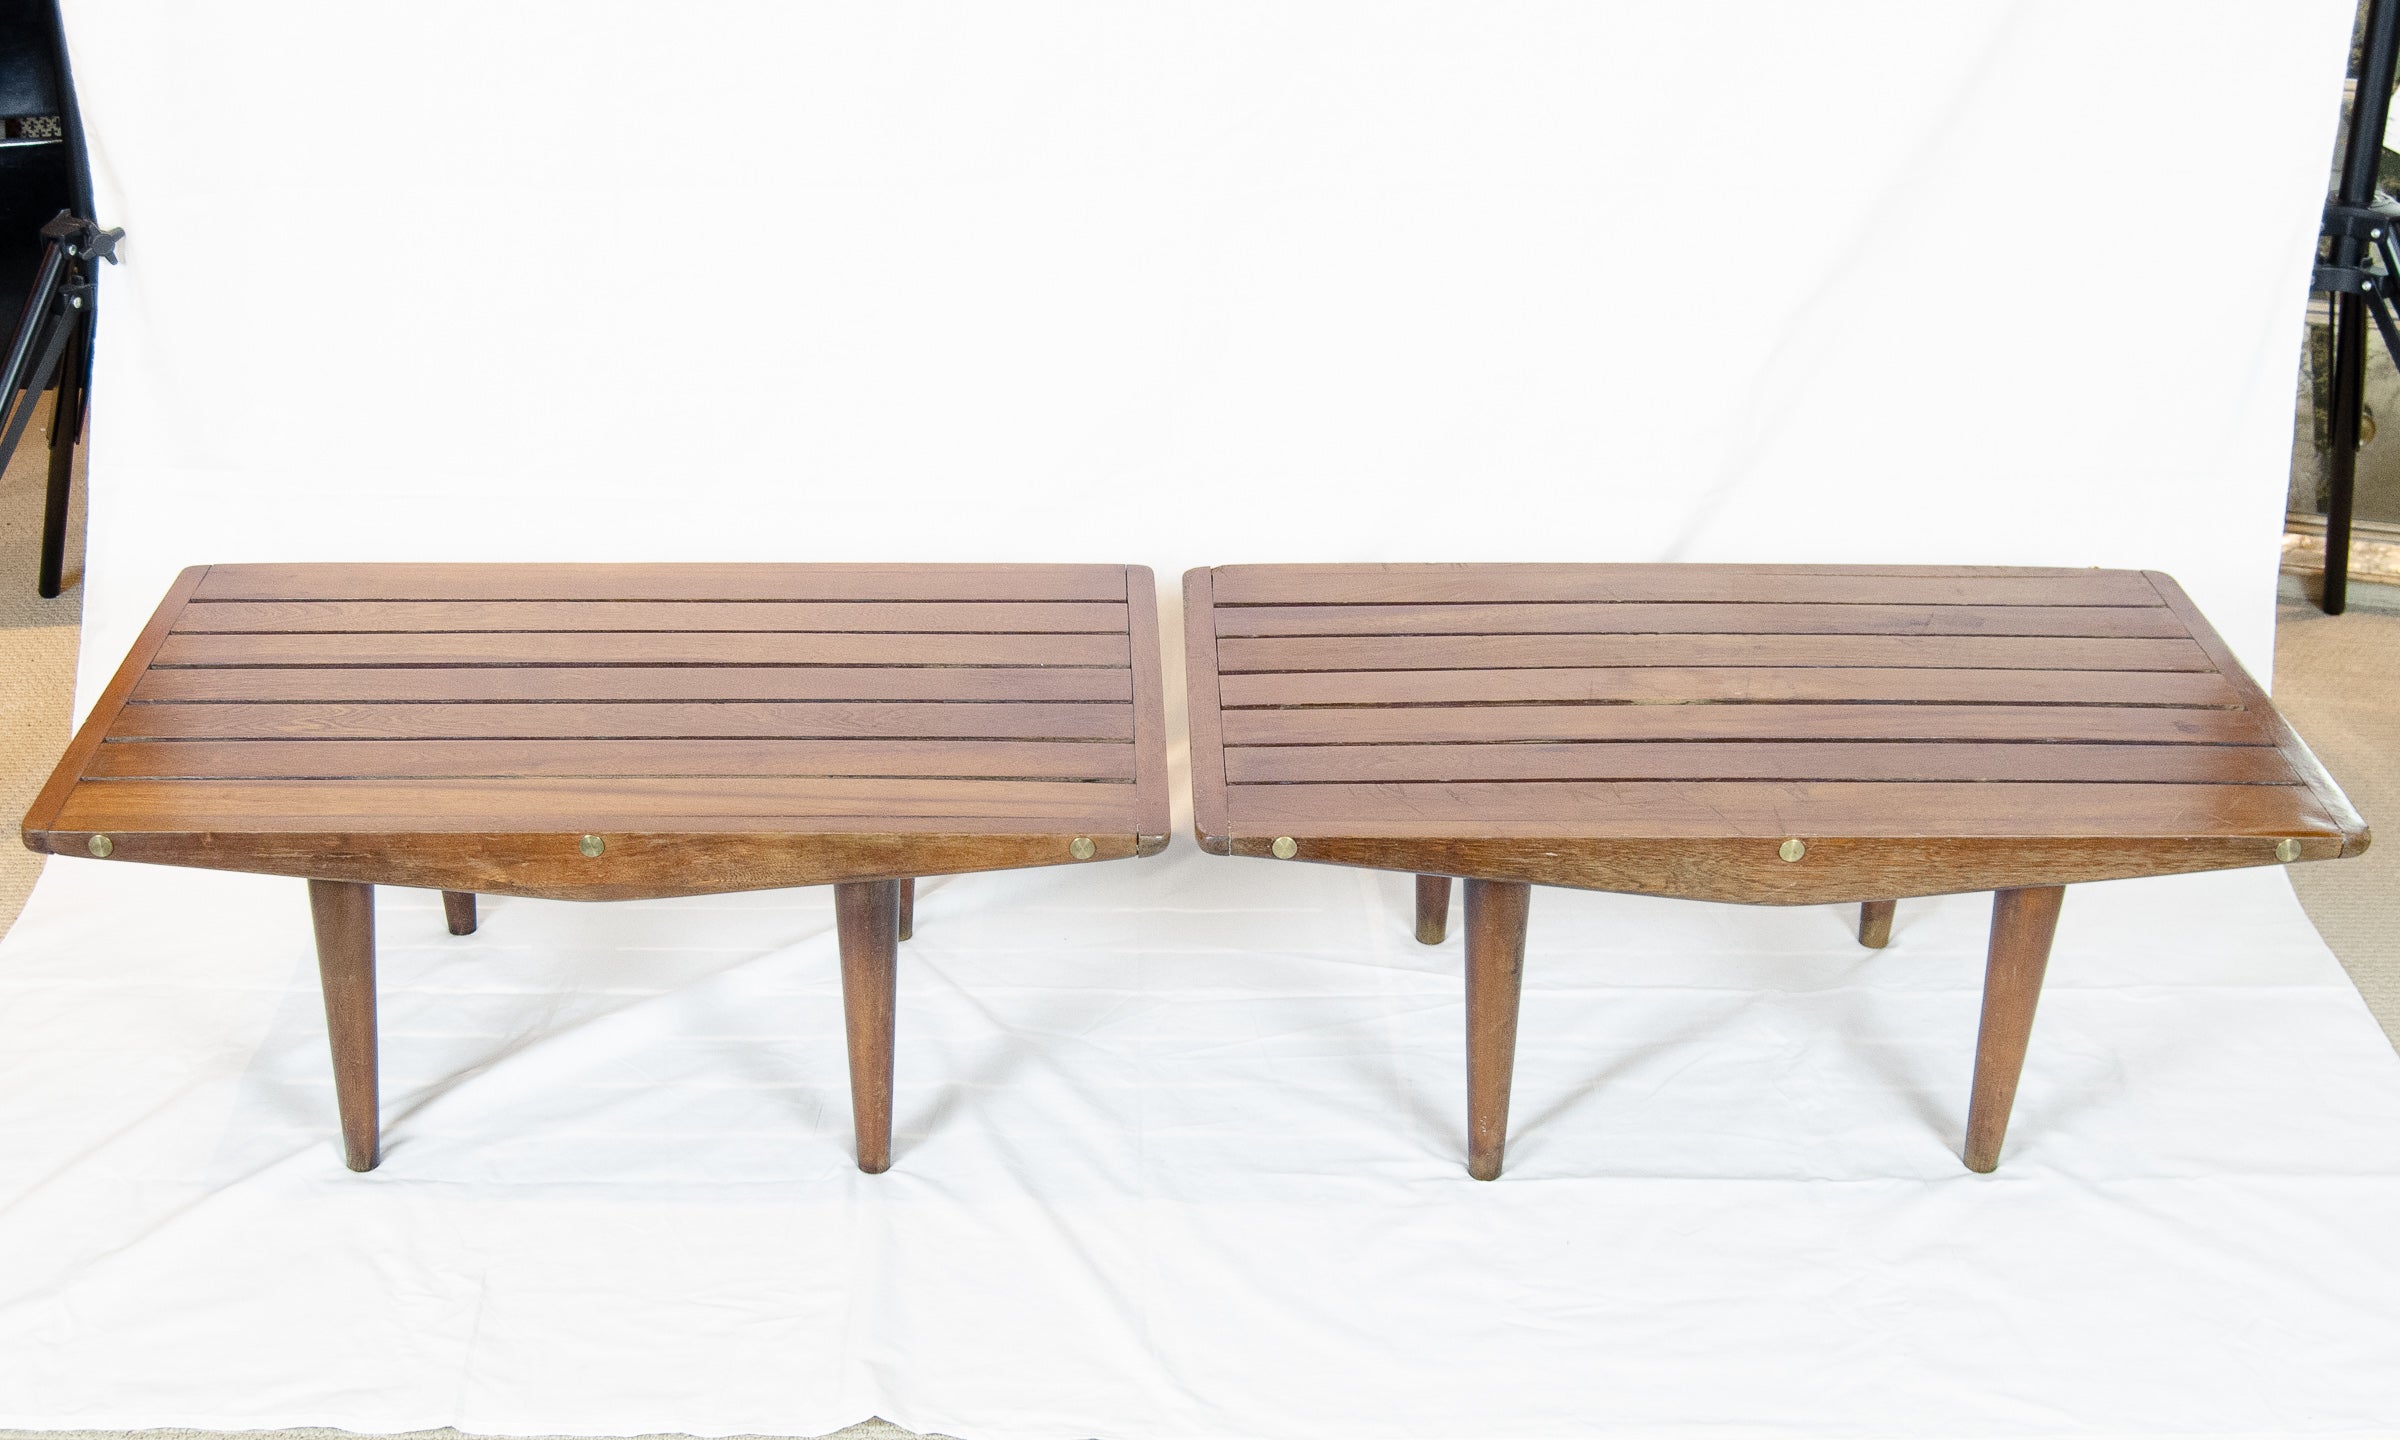 Studio-Made Slat Benches with Brass Accents